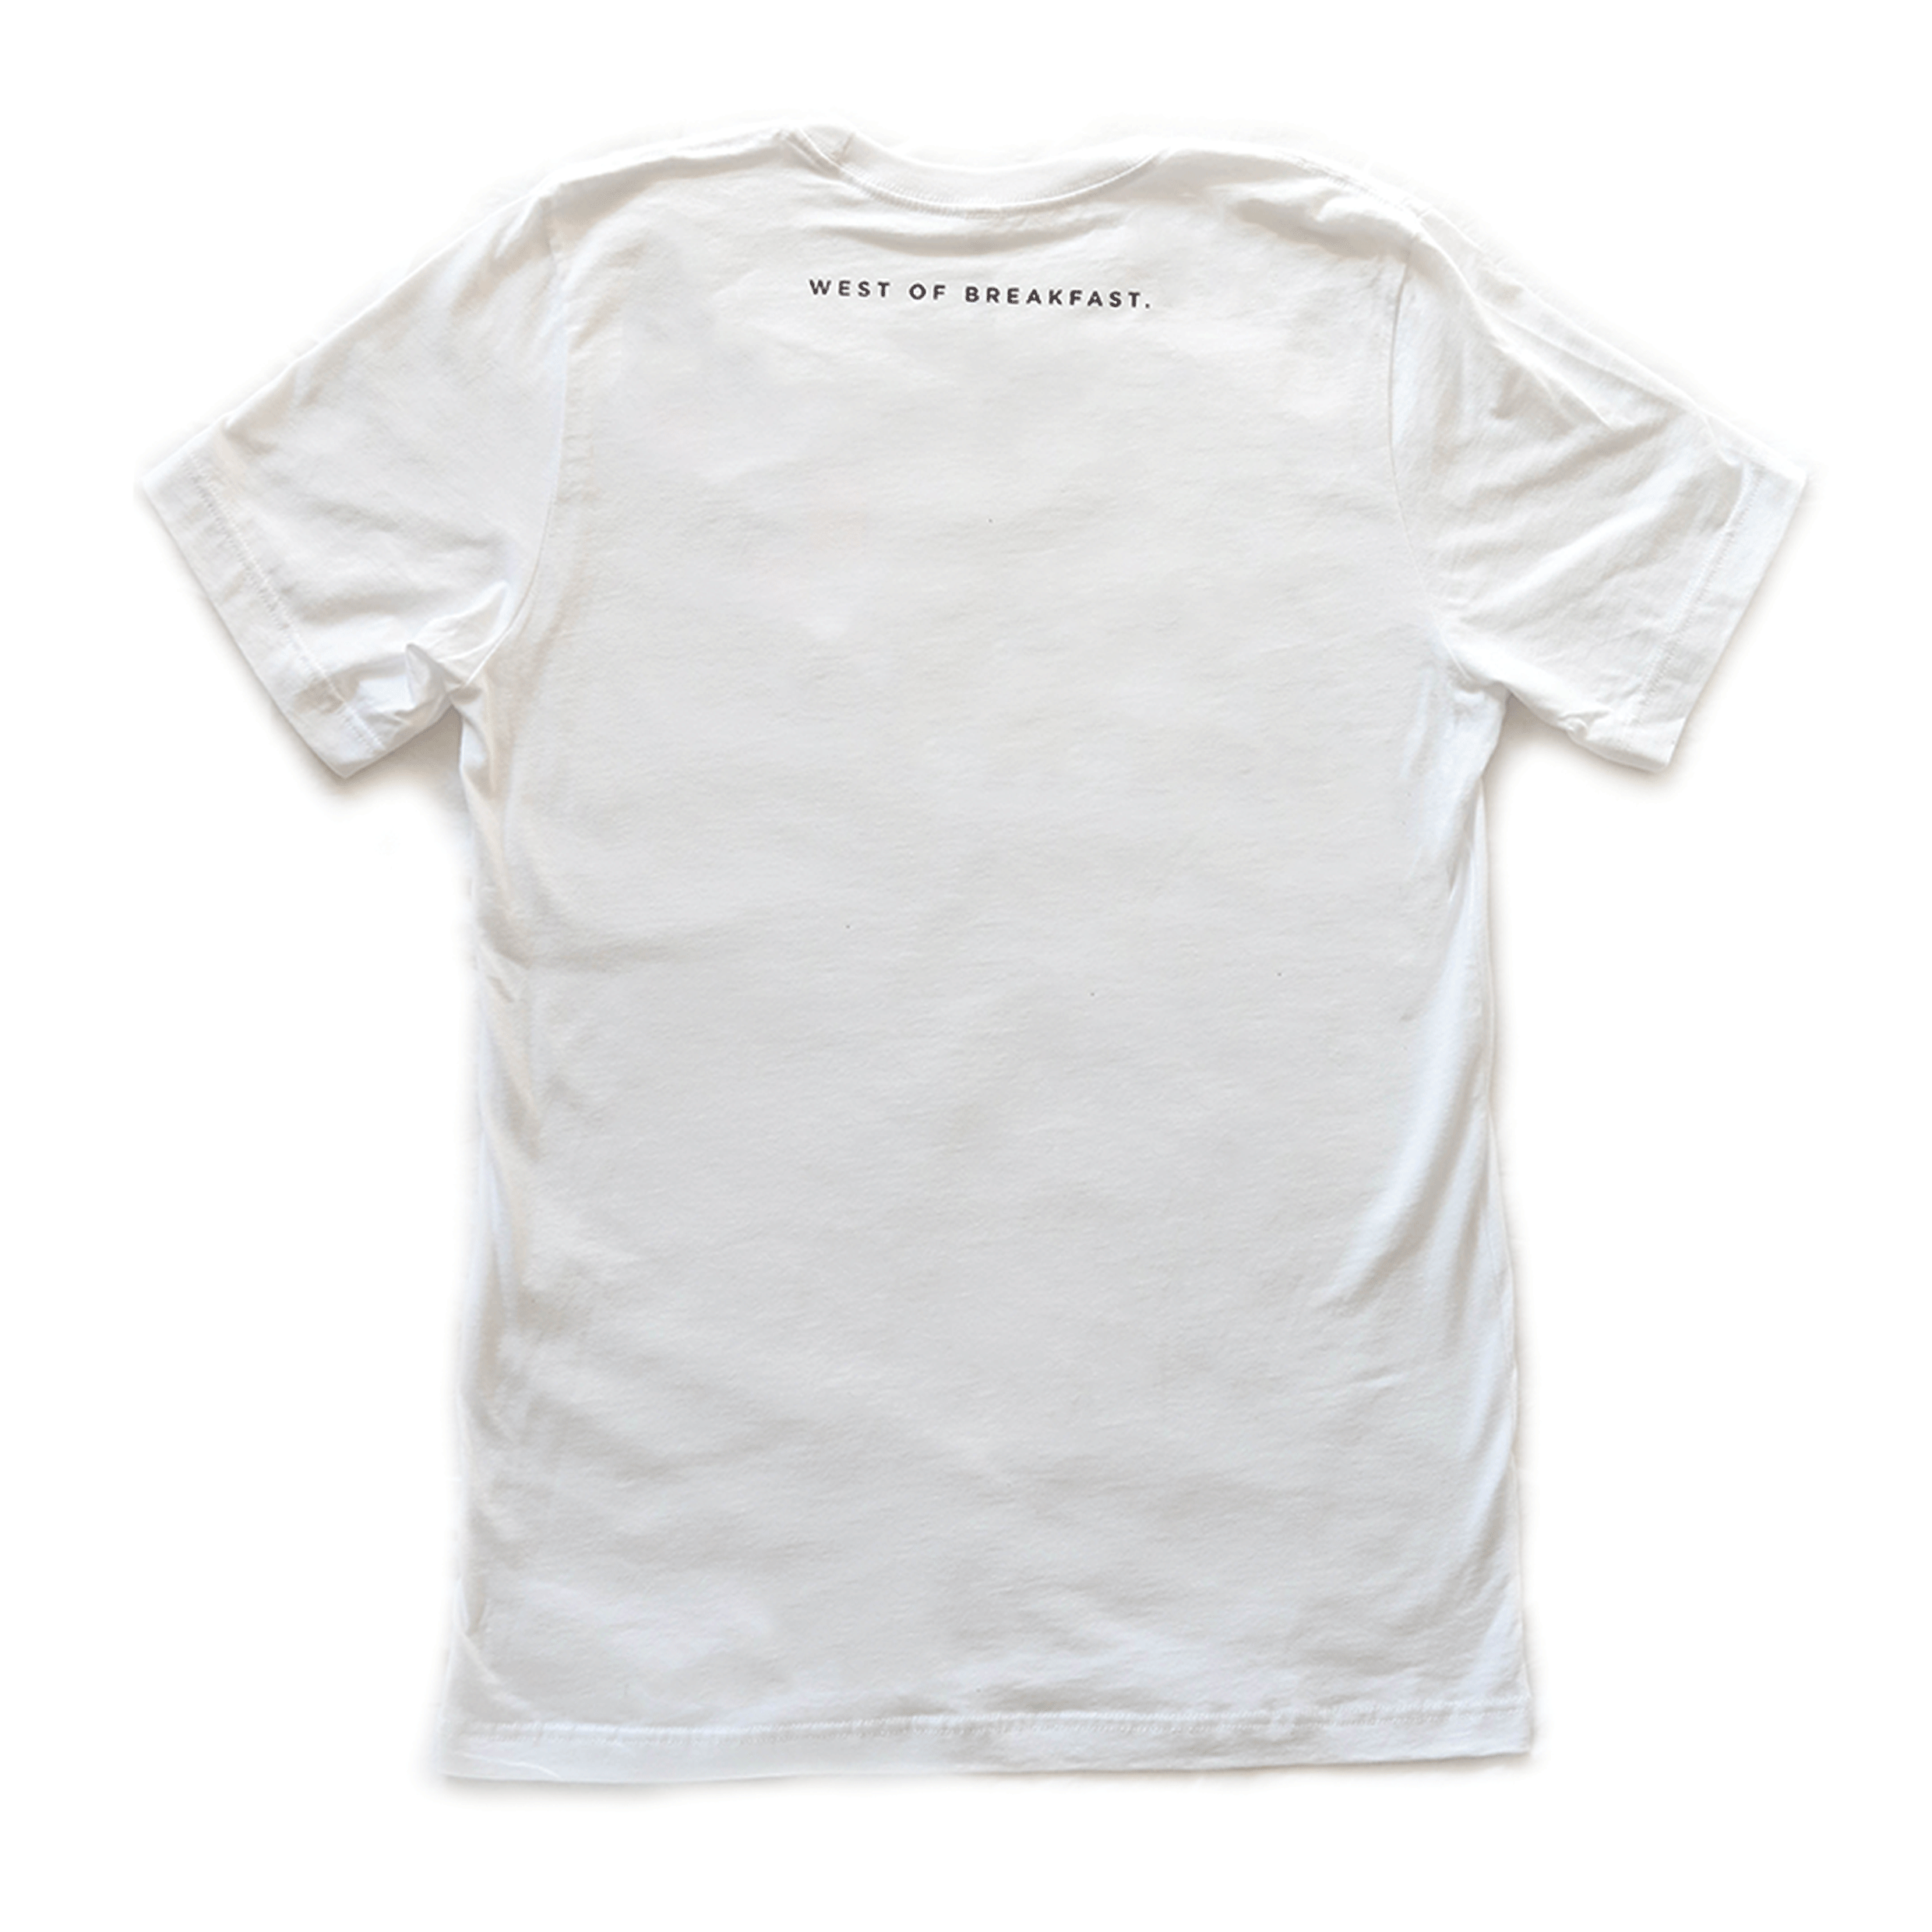 West of Breakfast | The Pajama Party Tee